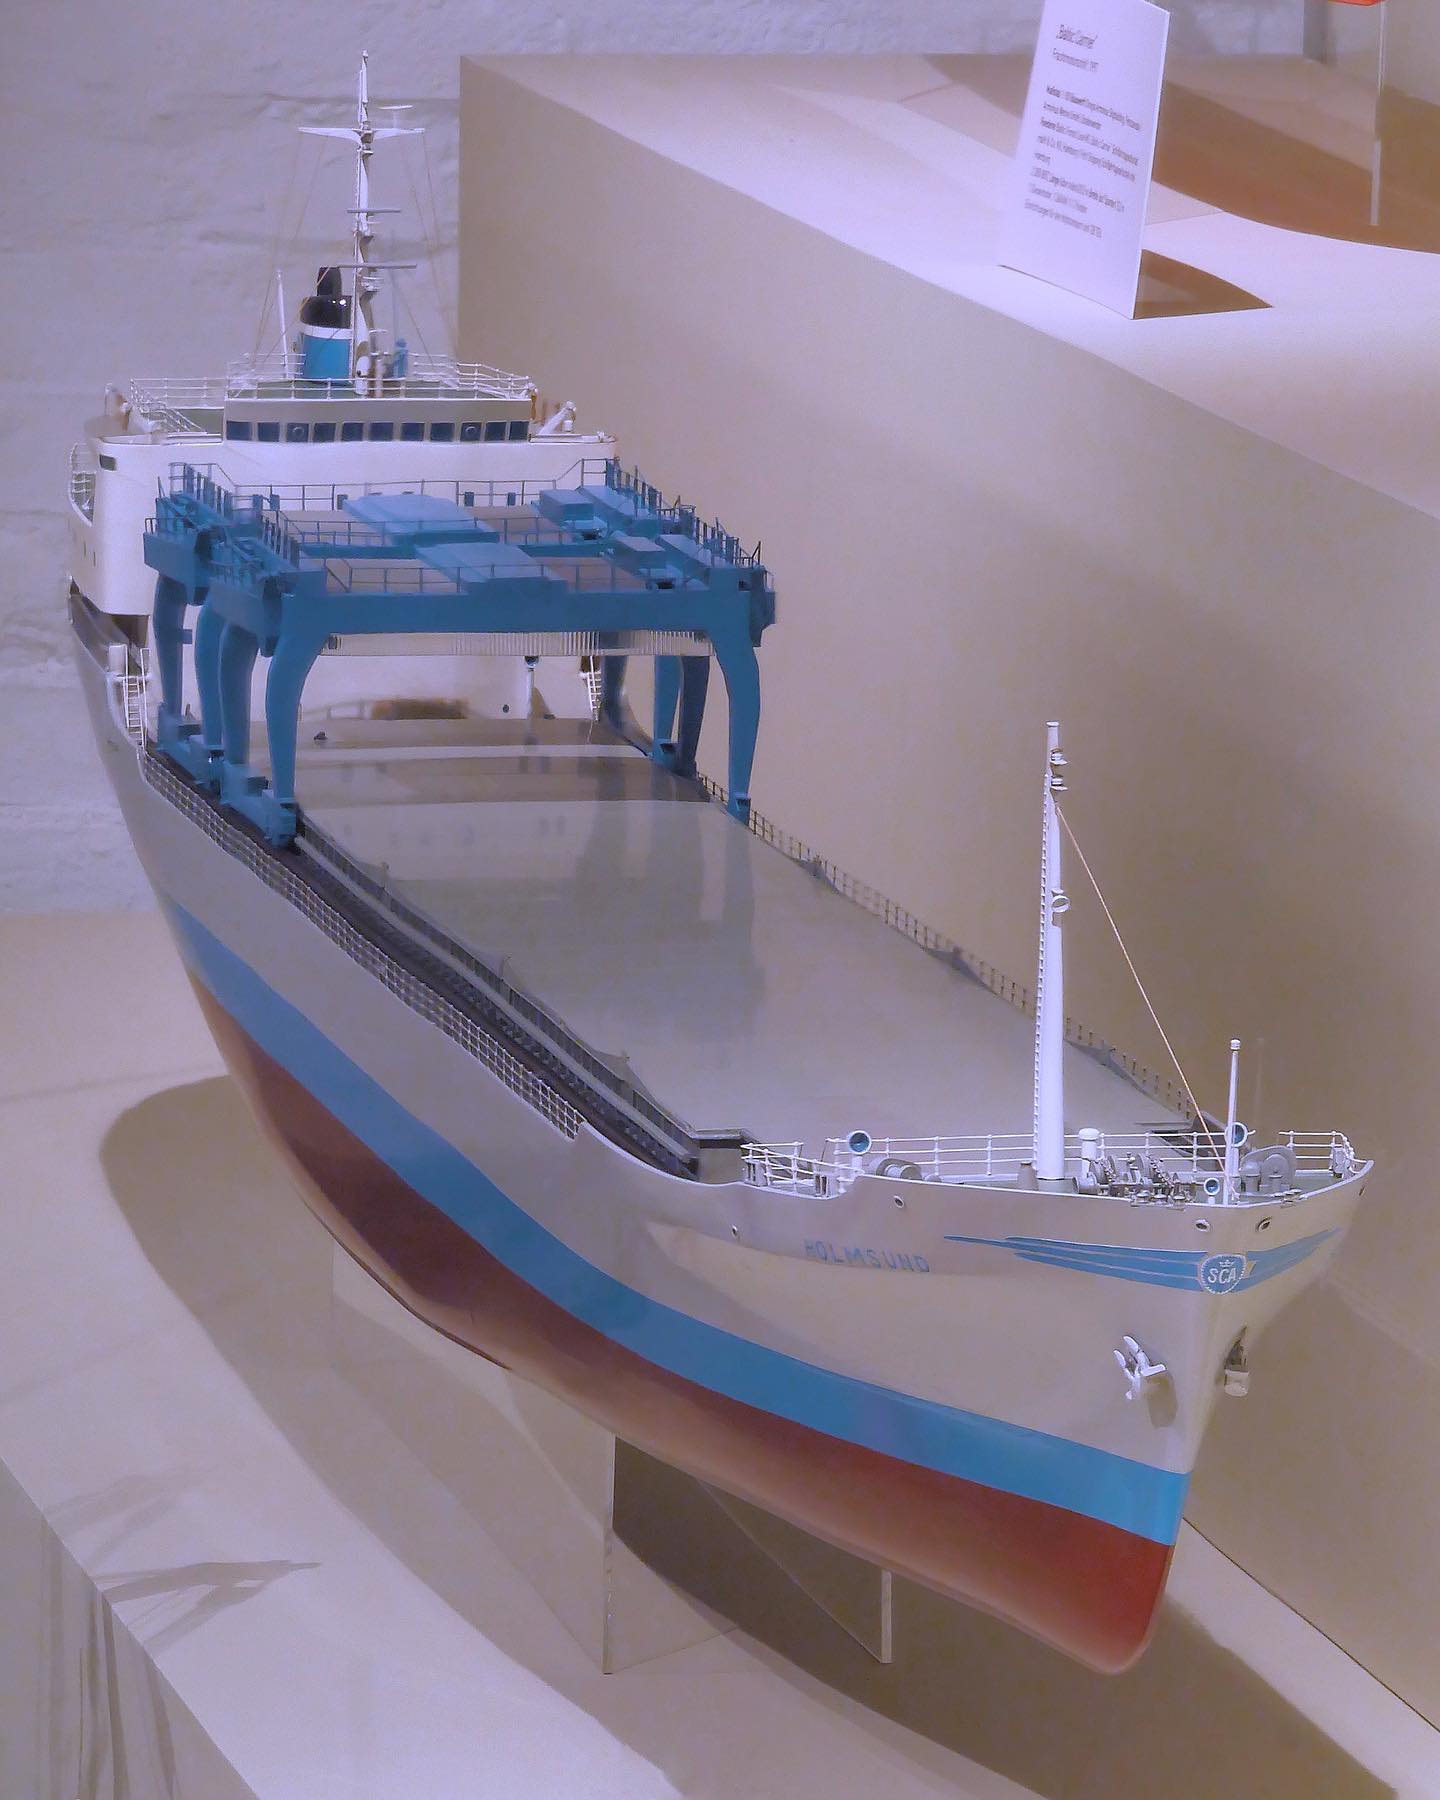 Bulk carrier Holmsund. Her original 1:100 scale shipyard model was built by the AB Sverre workshop in Gothenburg and donated to our collection as part of Dr. Engel's estate. It is part of our exhibition on modern maritime logistics on deck 6 of the museum.